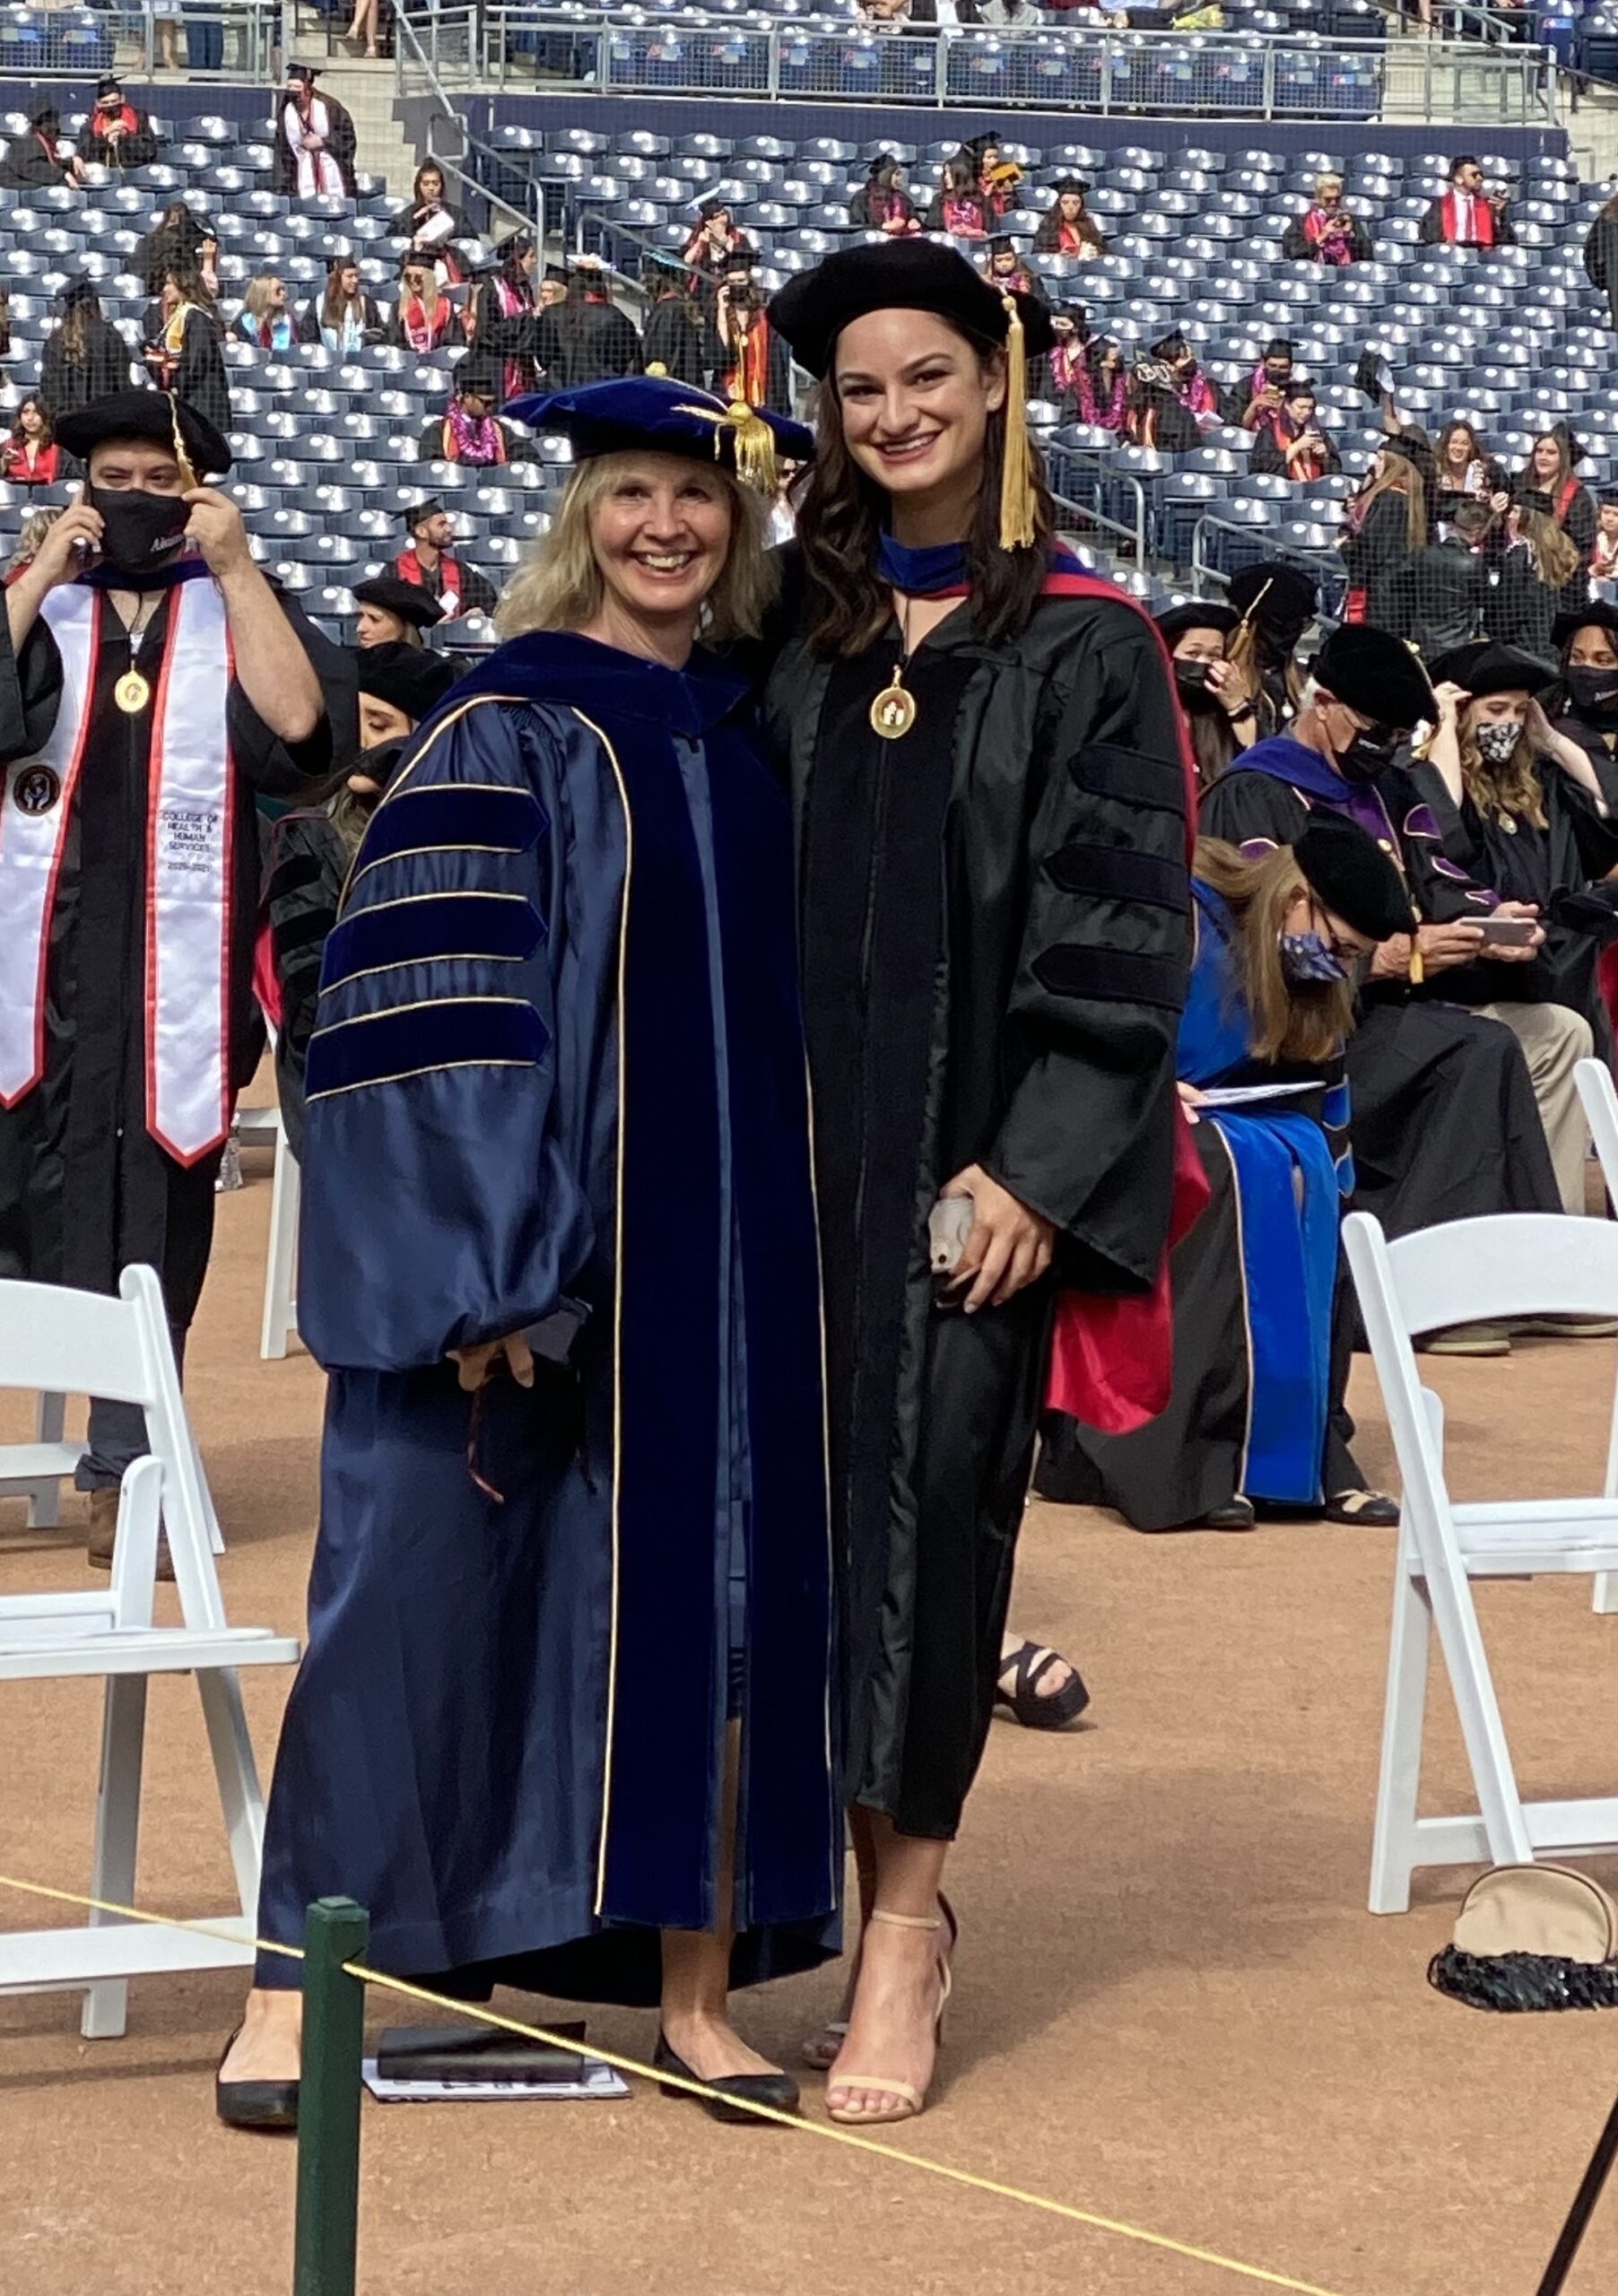 Congratulations to Dr. Brittany Lee on the completion of her dissertation “Word representation and processing in deaf readers: Evidence from ERPs and eye tracking”